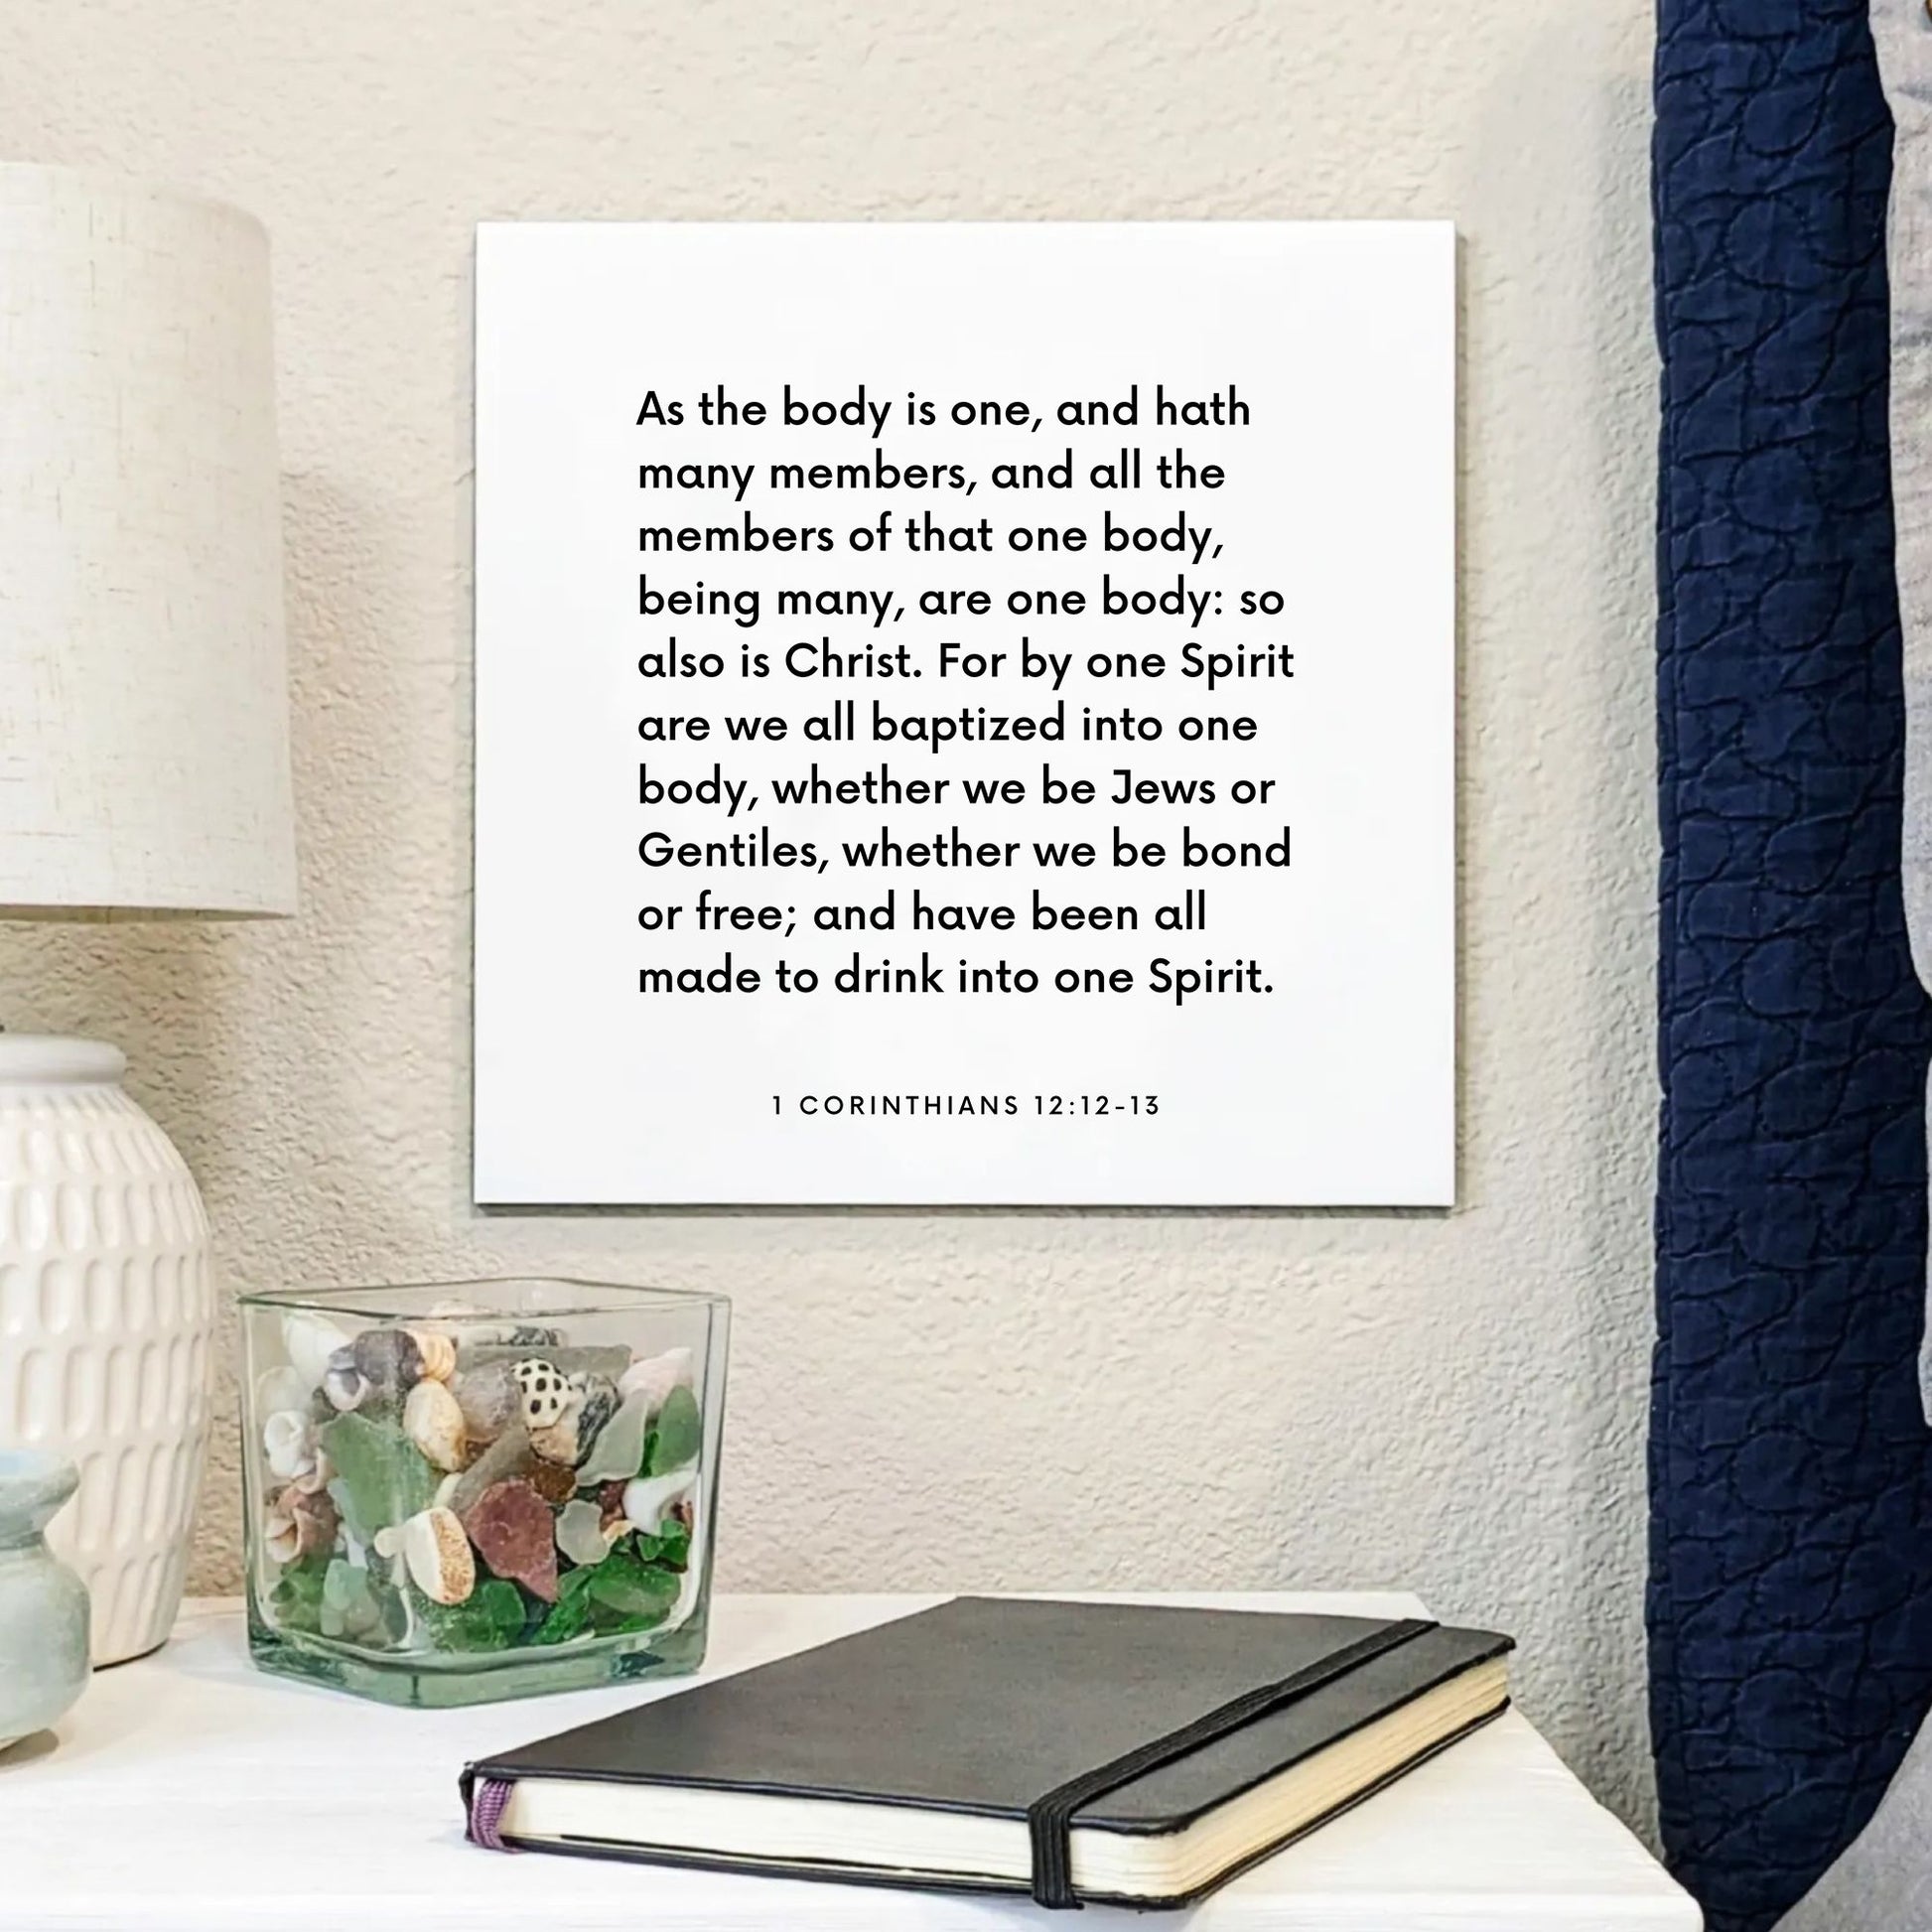 Bedside mouting of the scripture tile for 1 Corinthians 12:12-13 - "By one Spirit are we all baptized into one body"